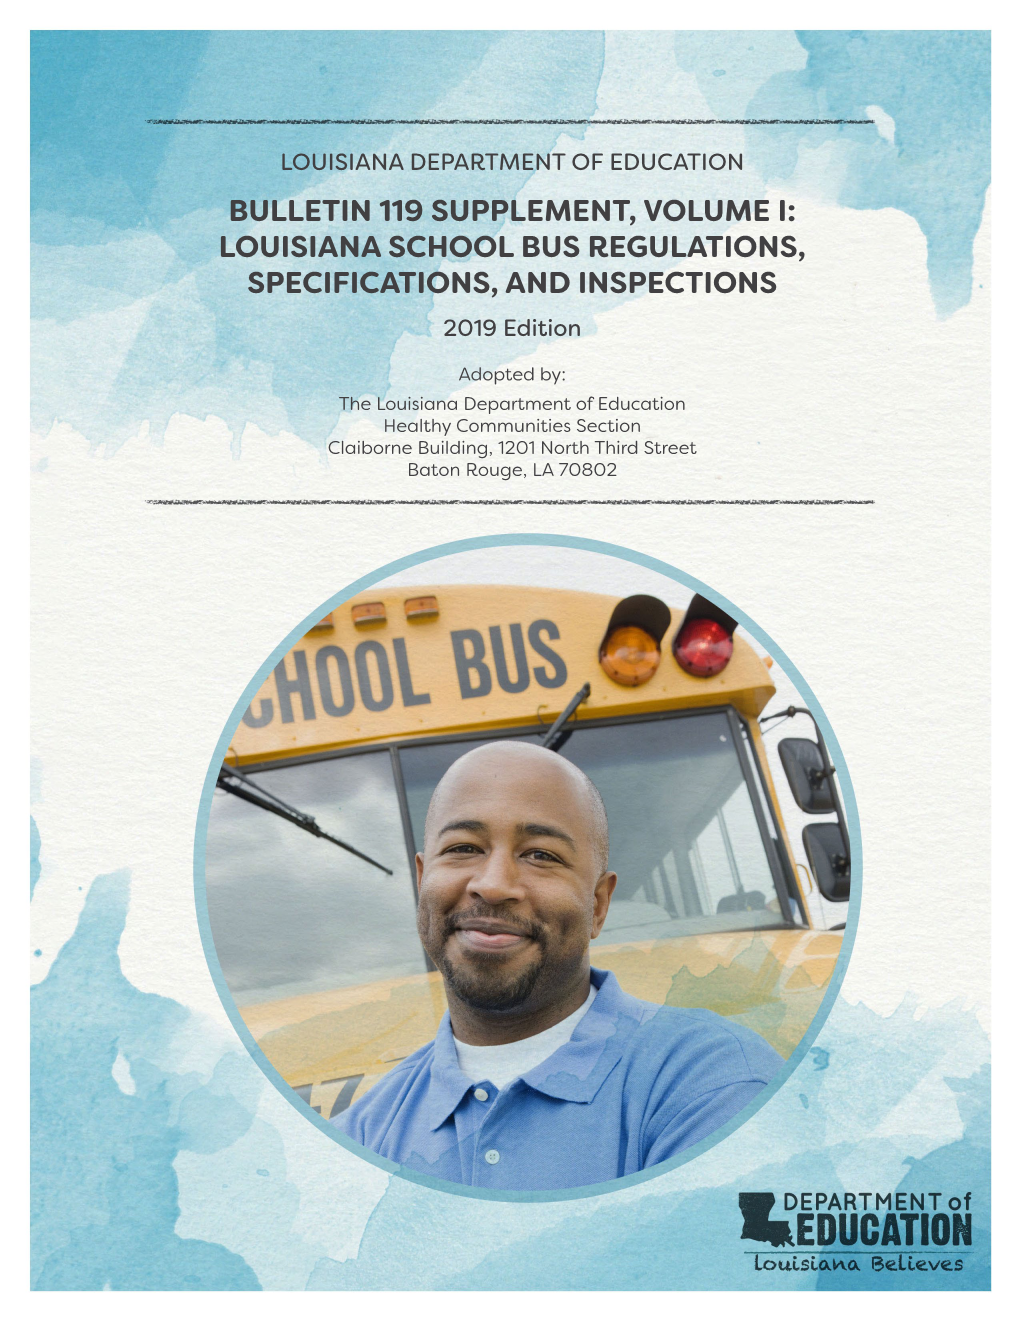 LOUISIANA SCHOOL BUS REGULATIONS, SPECIFICATIONS, and INSPECTIONS 2019 Edition